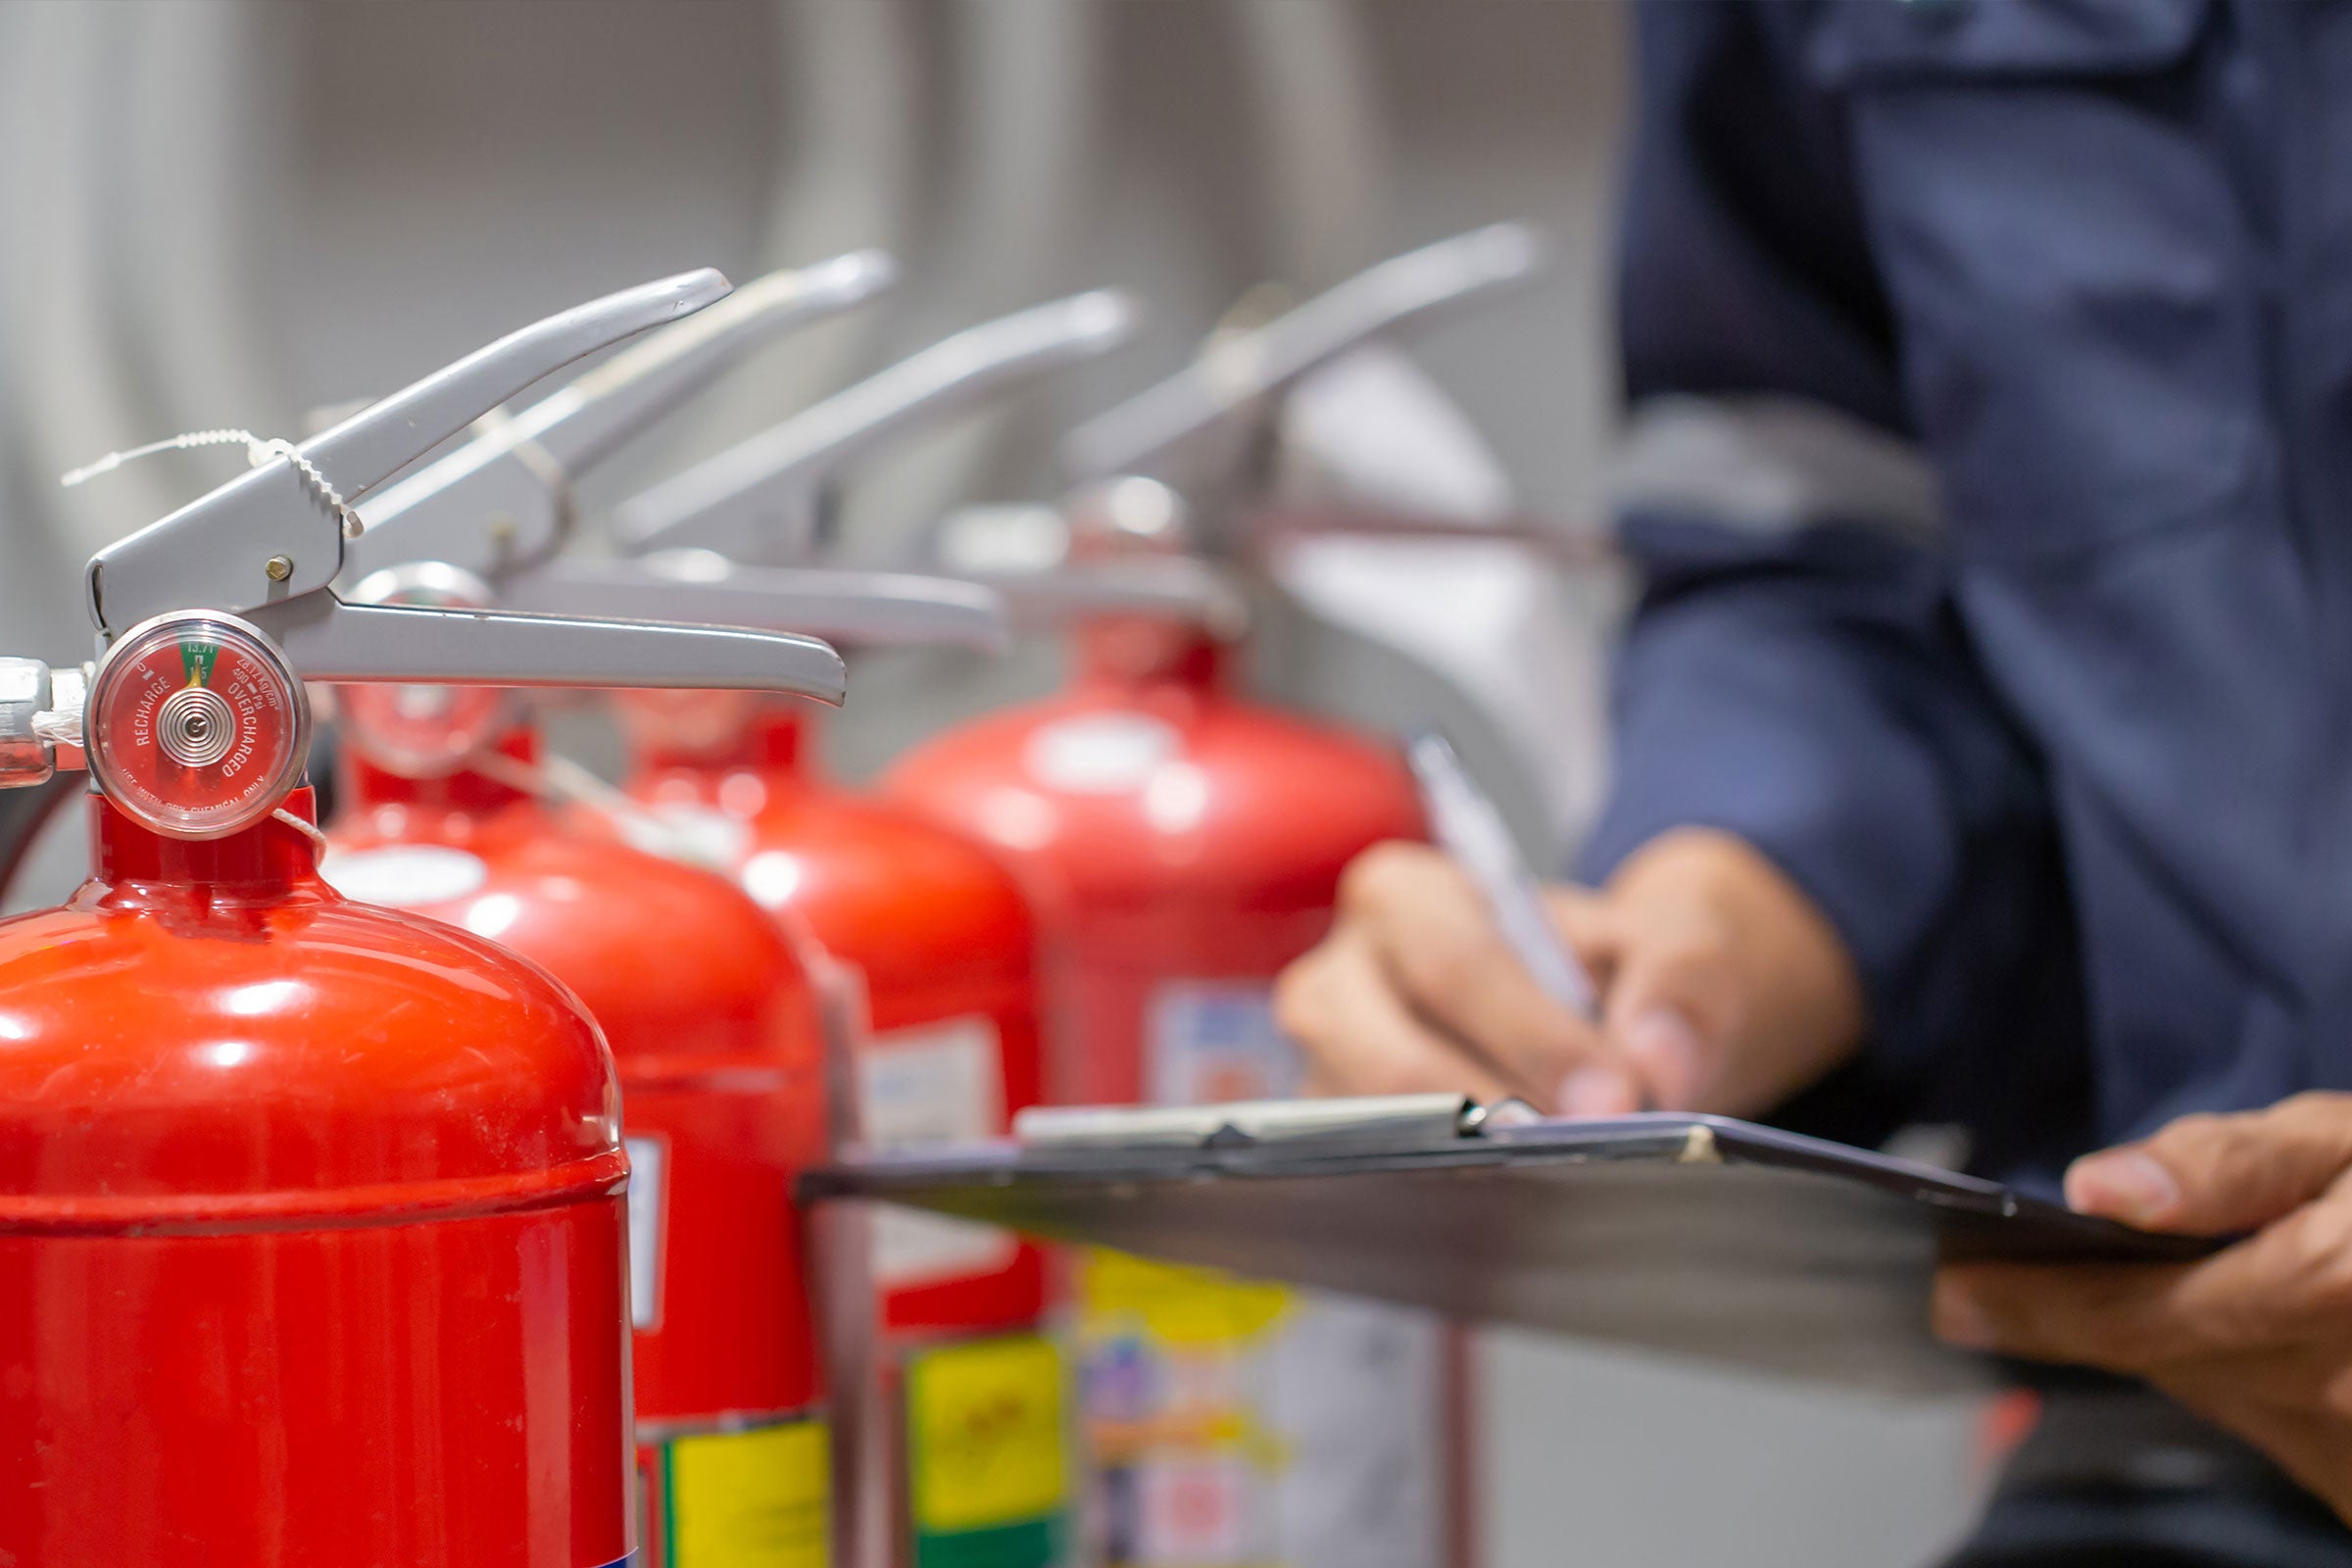 Engineer inspecting a row of fire extinguishers in the fire control room for safety training and fire prevention.